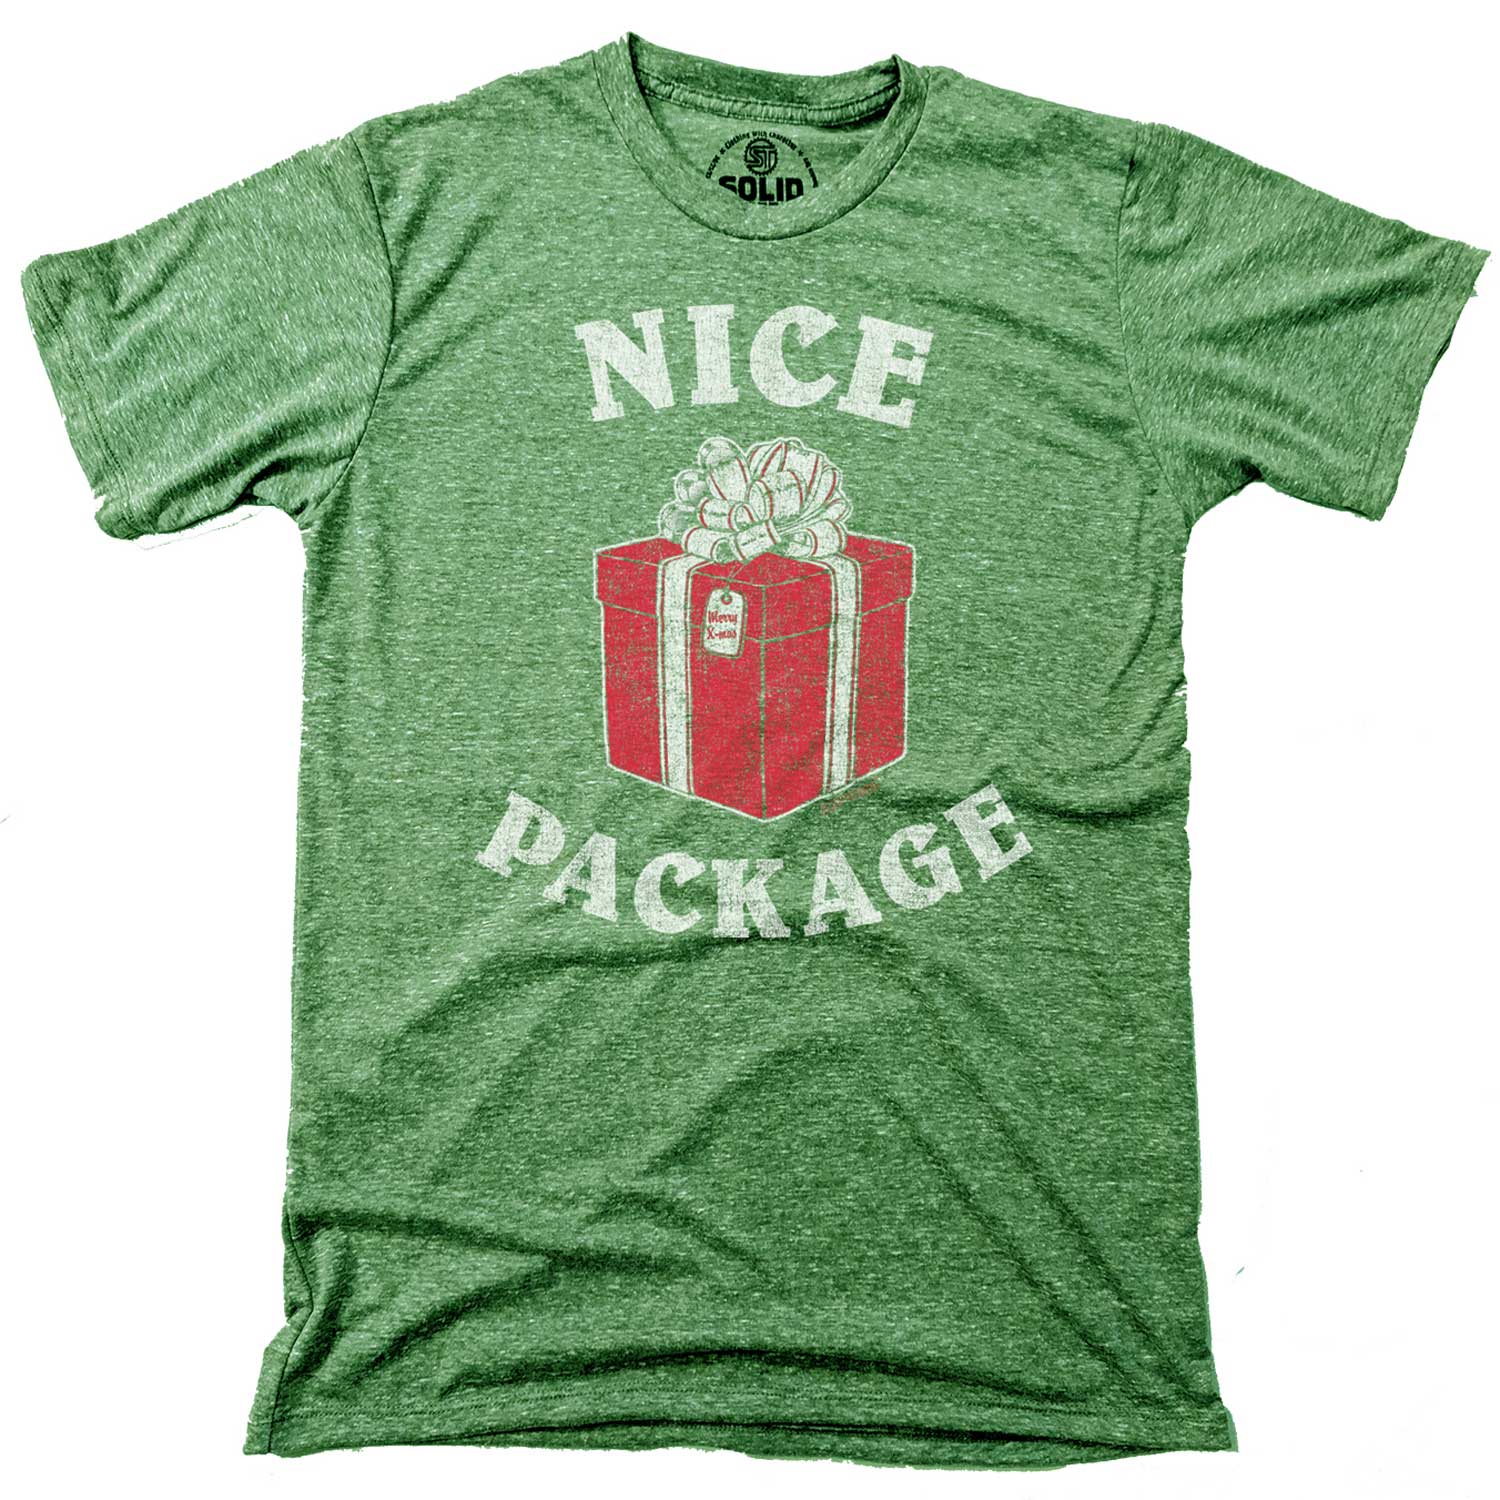 Men's Nice Package Vintage Graphic T-Shirt | Funny Christmas Party Gift Tee | Solid Threads